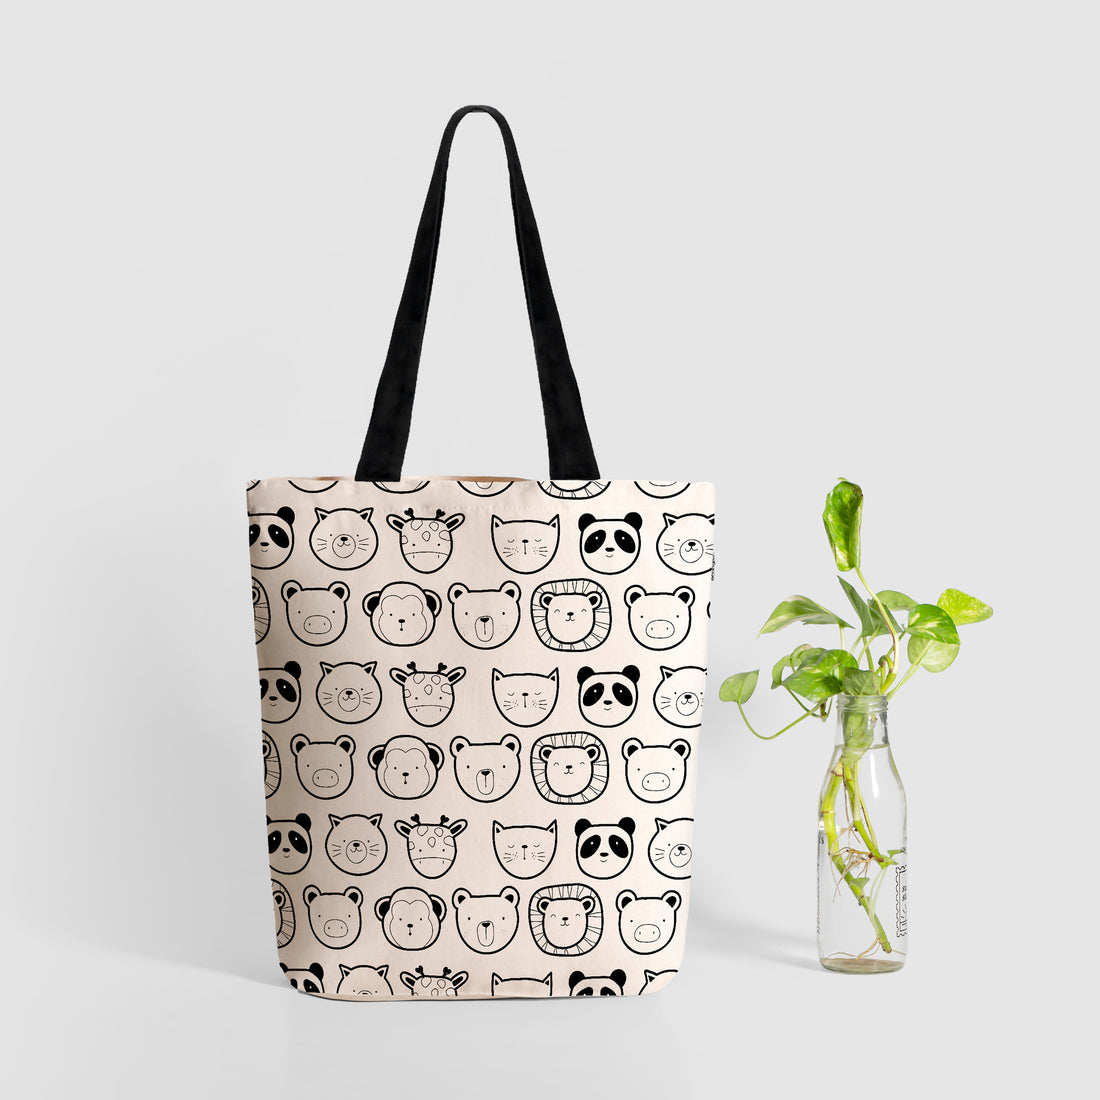 Tote and bag, Tote bags women, Birthday gifts, Tote bags office, Side bags for ladies, Ecoright tote bags